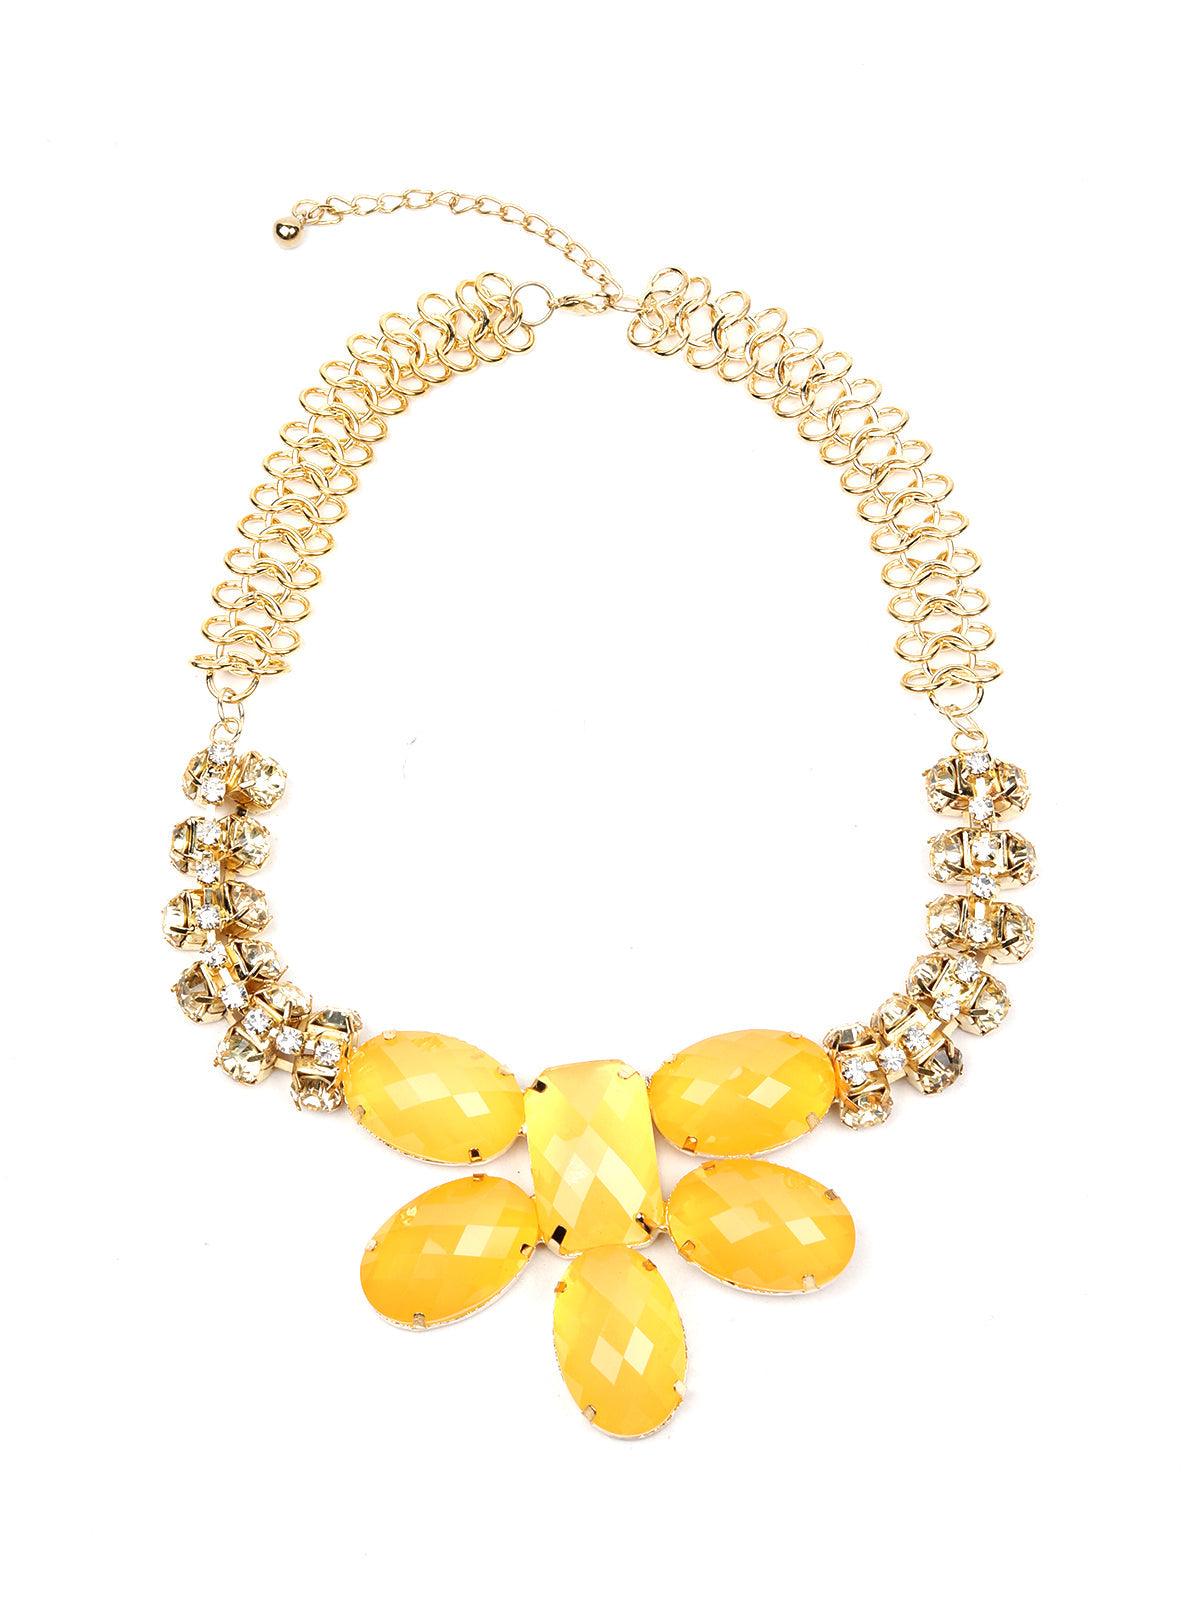 Vibrant yellow stunning necklace - Odette